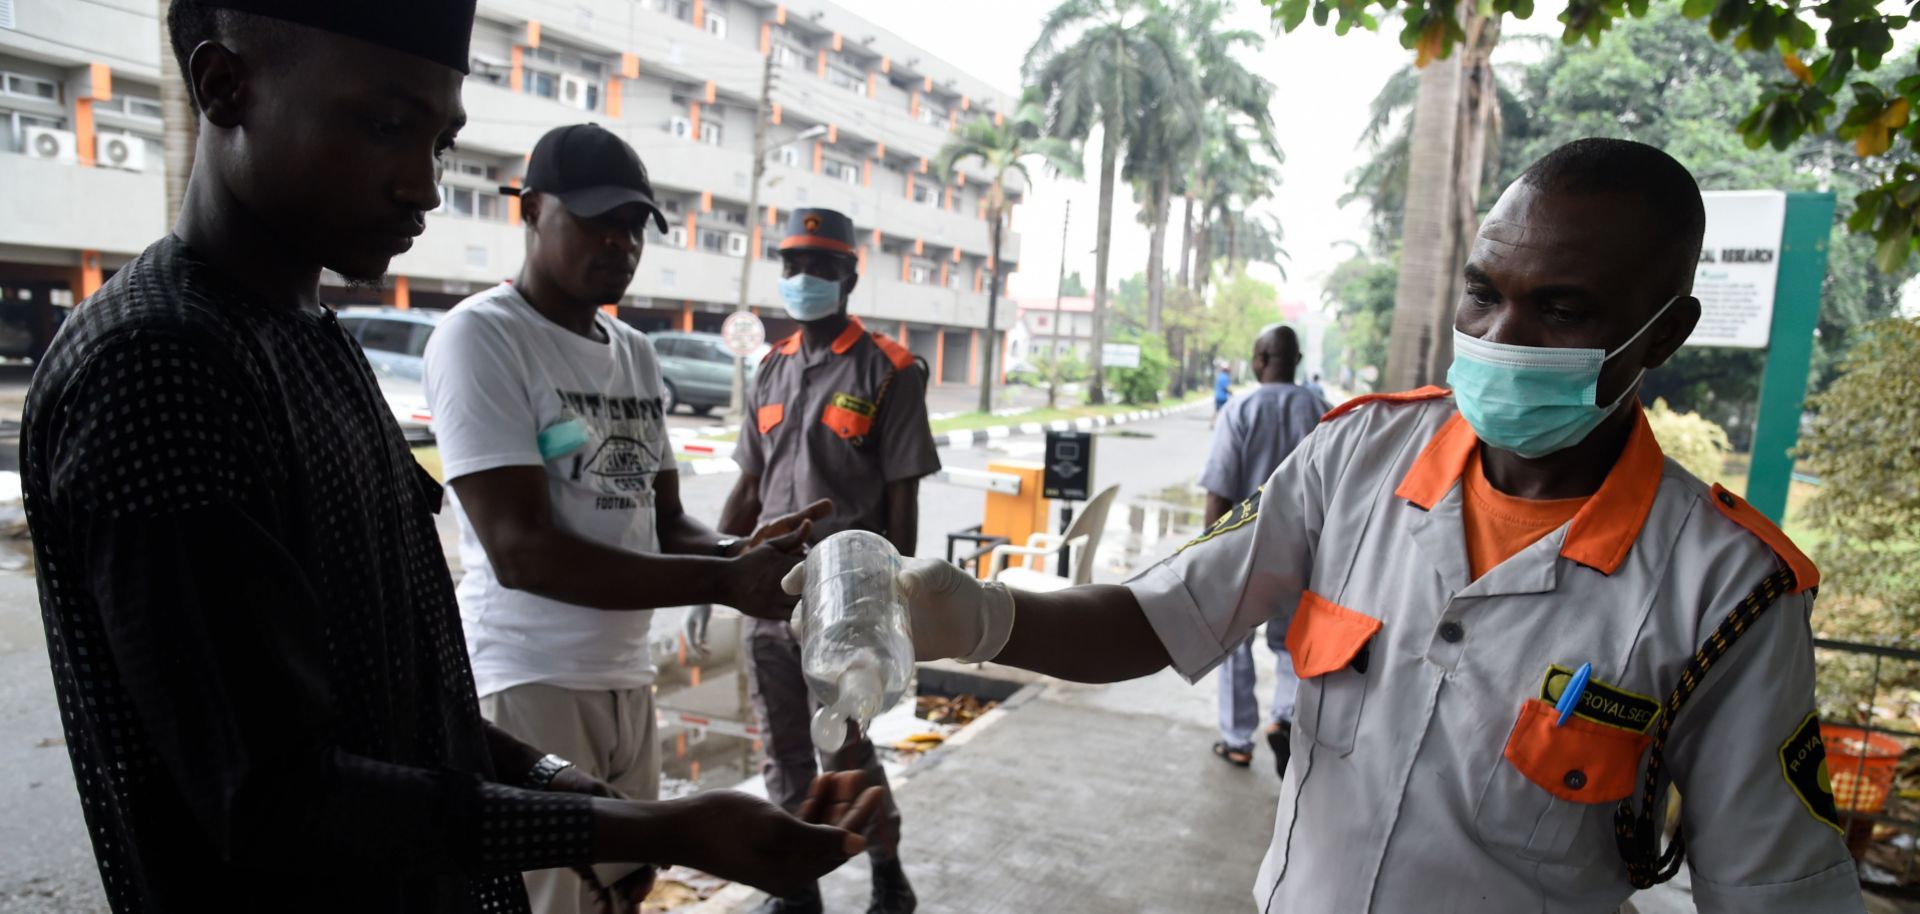 A photo of a security official administers hand sanitizer in Lagos, Nigeria, on Feb. 28, 2020. The city's 20 million residents scrambled for hygiene products following the announcement of the first confirmed coronavirus case in sub-Saharan Africa.